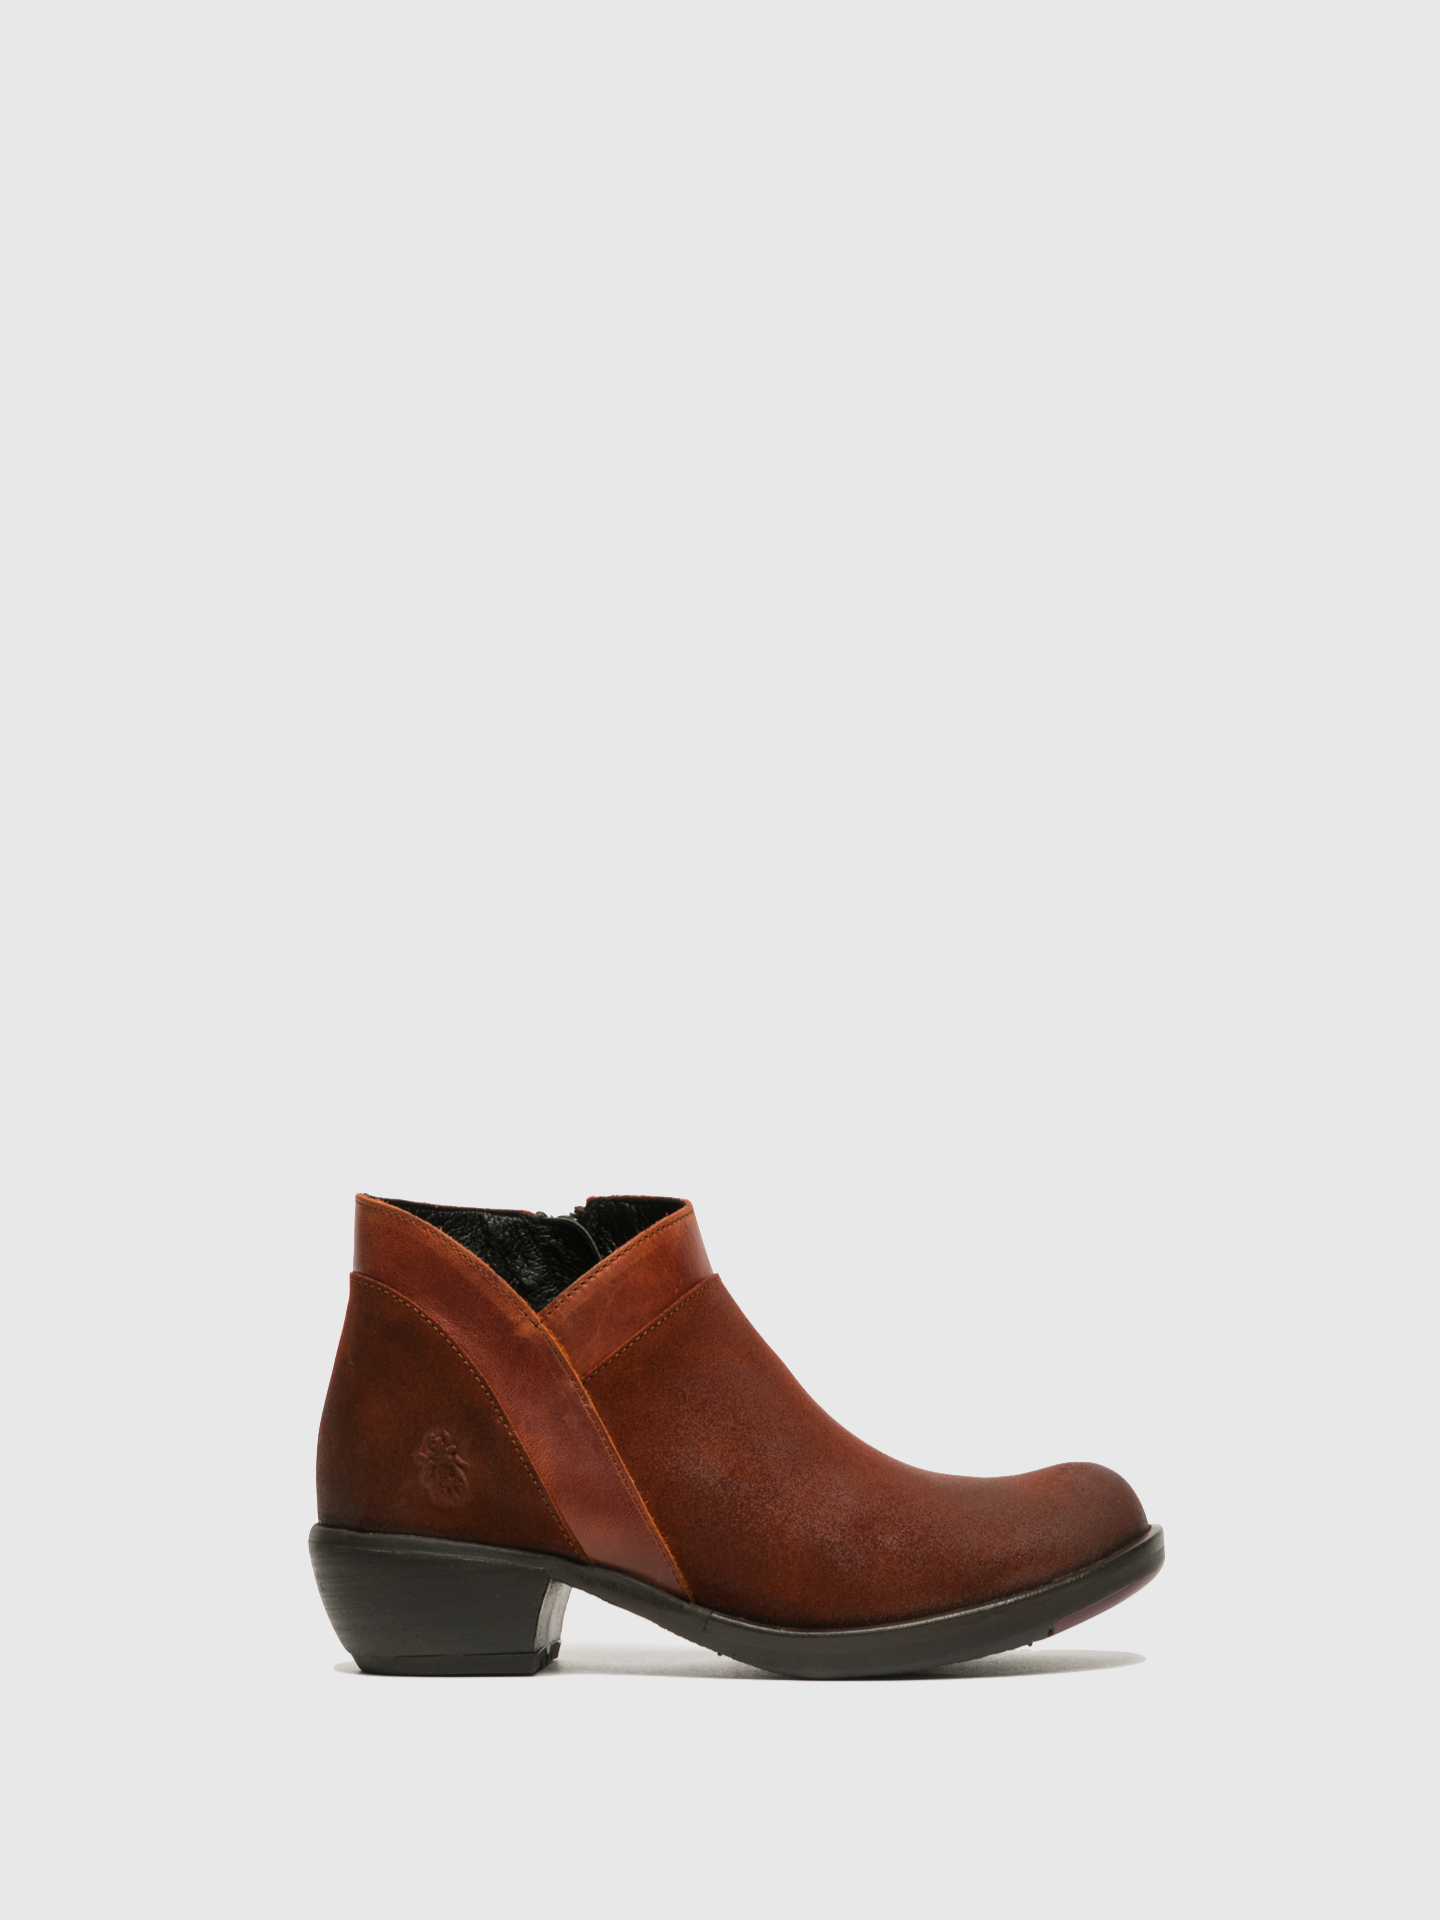 Fly London DarkRed Zip Up Ankle Boots